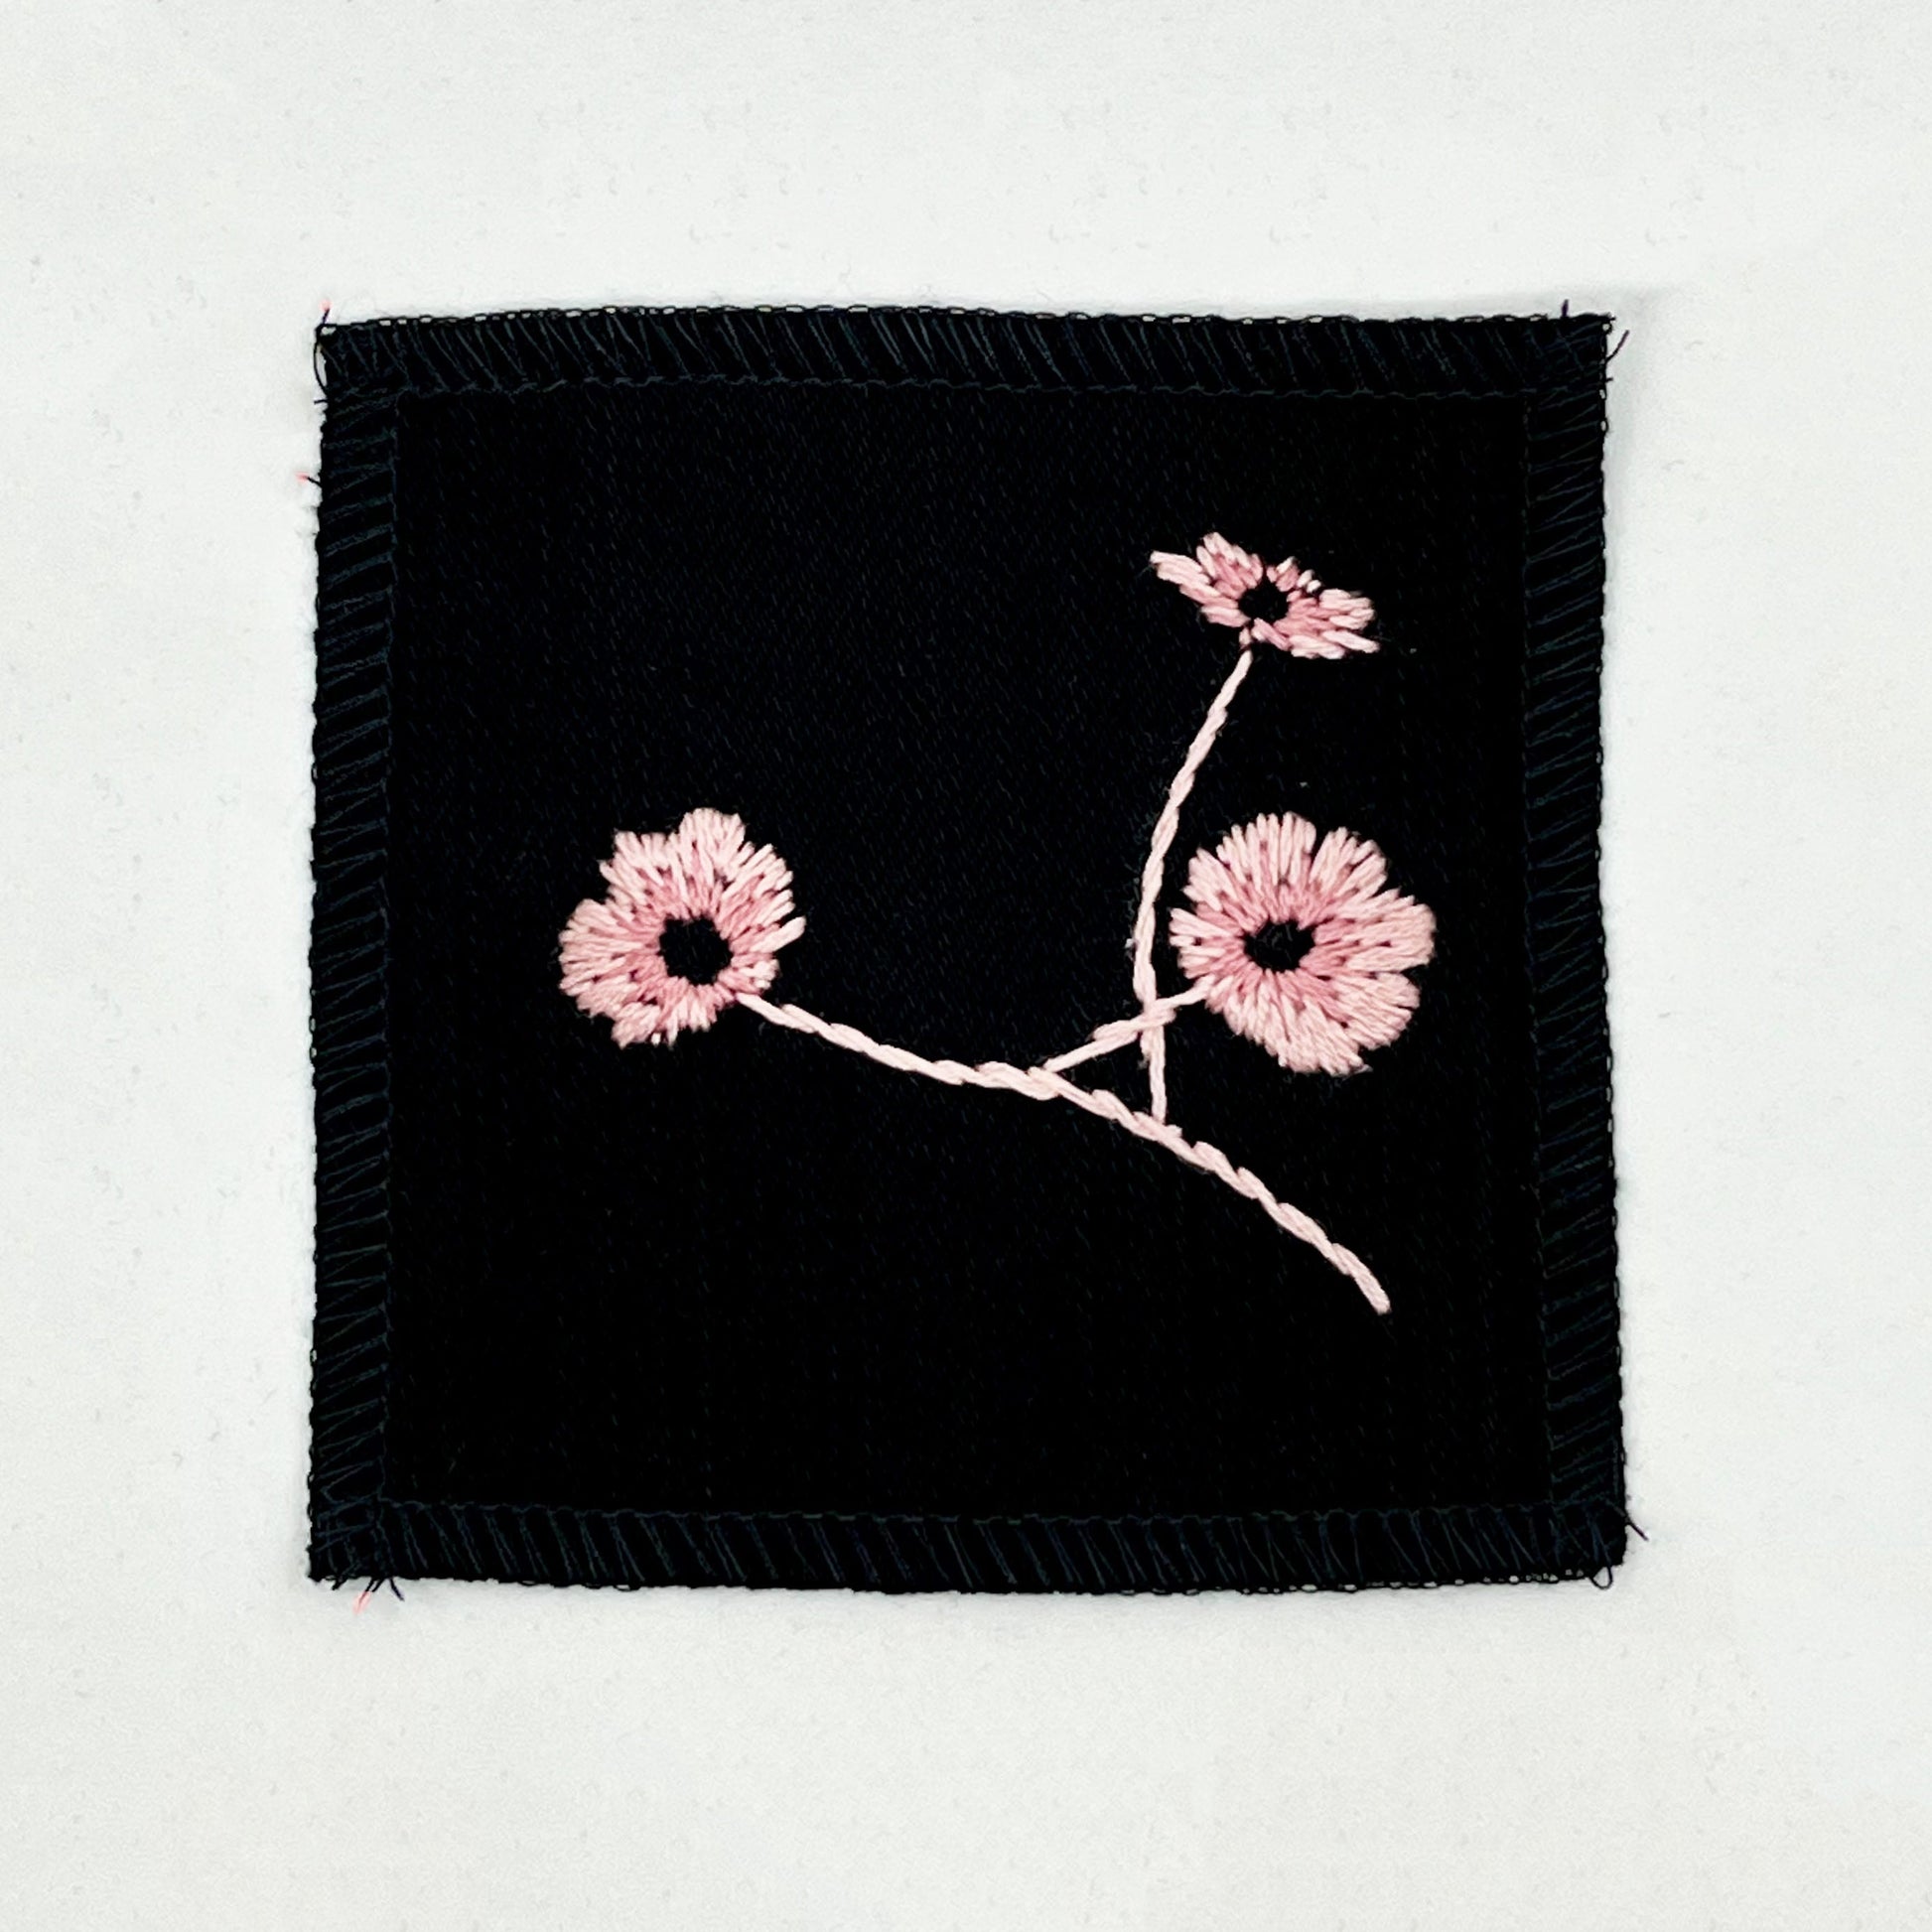 a black colored square patch, hand embroidered with three poppies on a stem, in shades of pink, with overlocked edges, on a white background